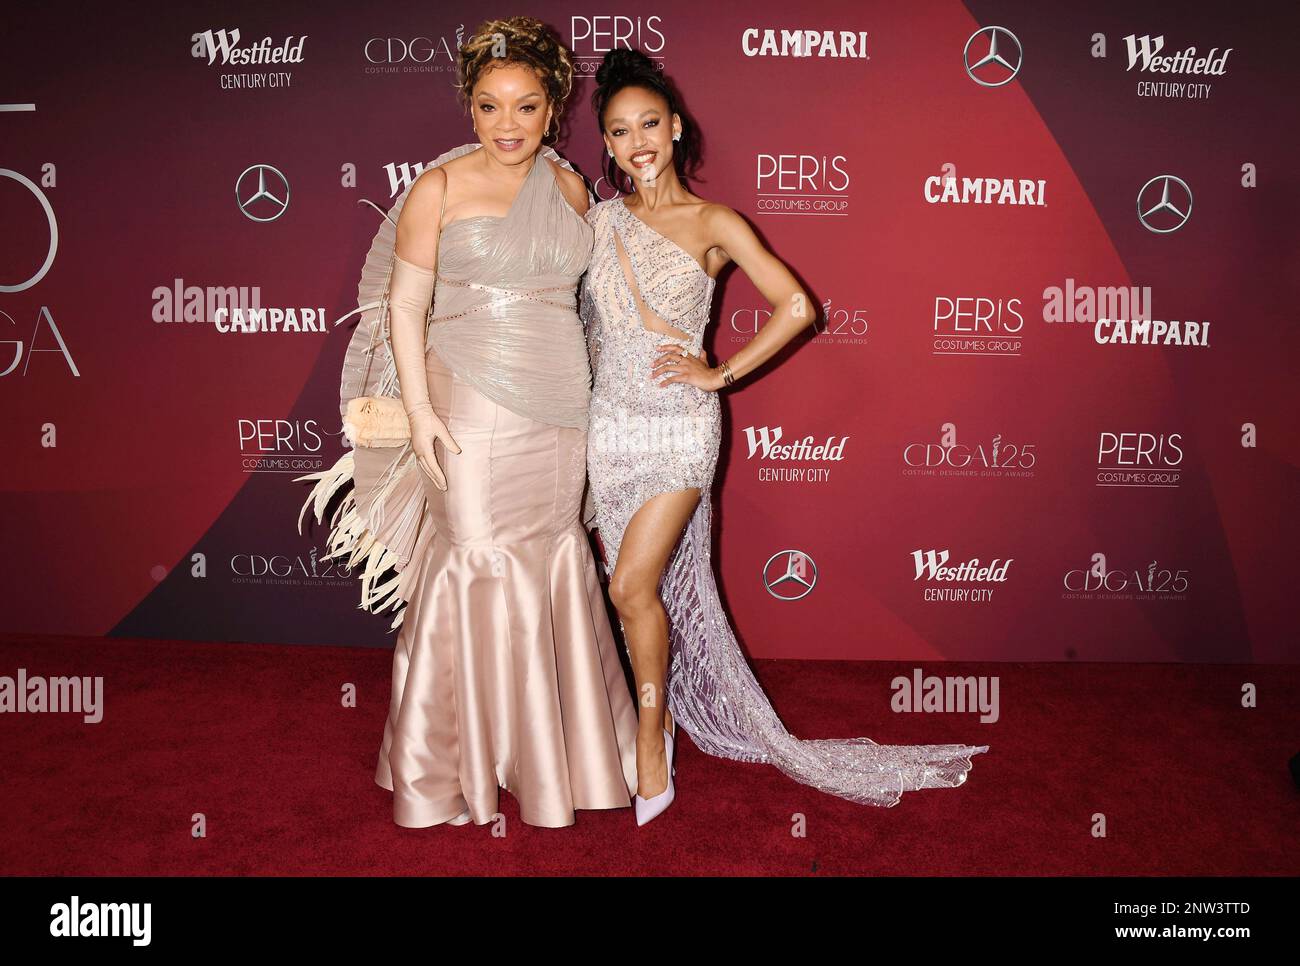 Los Angeles, California, USA. 27th Feb, 2023. (L-R) Ruth E. Carter and D'on Lauren Edwards attend the 25th Annual Costume Designers Guild Awards at the Fairmont Century Plaza on February 27, 2023 in Los Angeles, California. Credit: Jeffrey Mayer/Jtm Photos/Media Punch/Alamy Live News Stock Photo